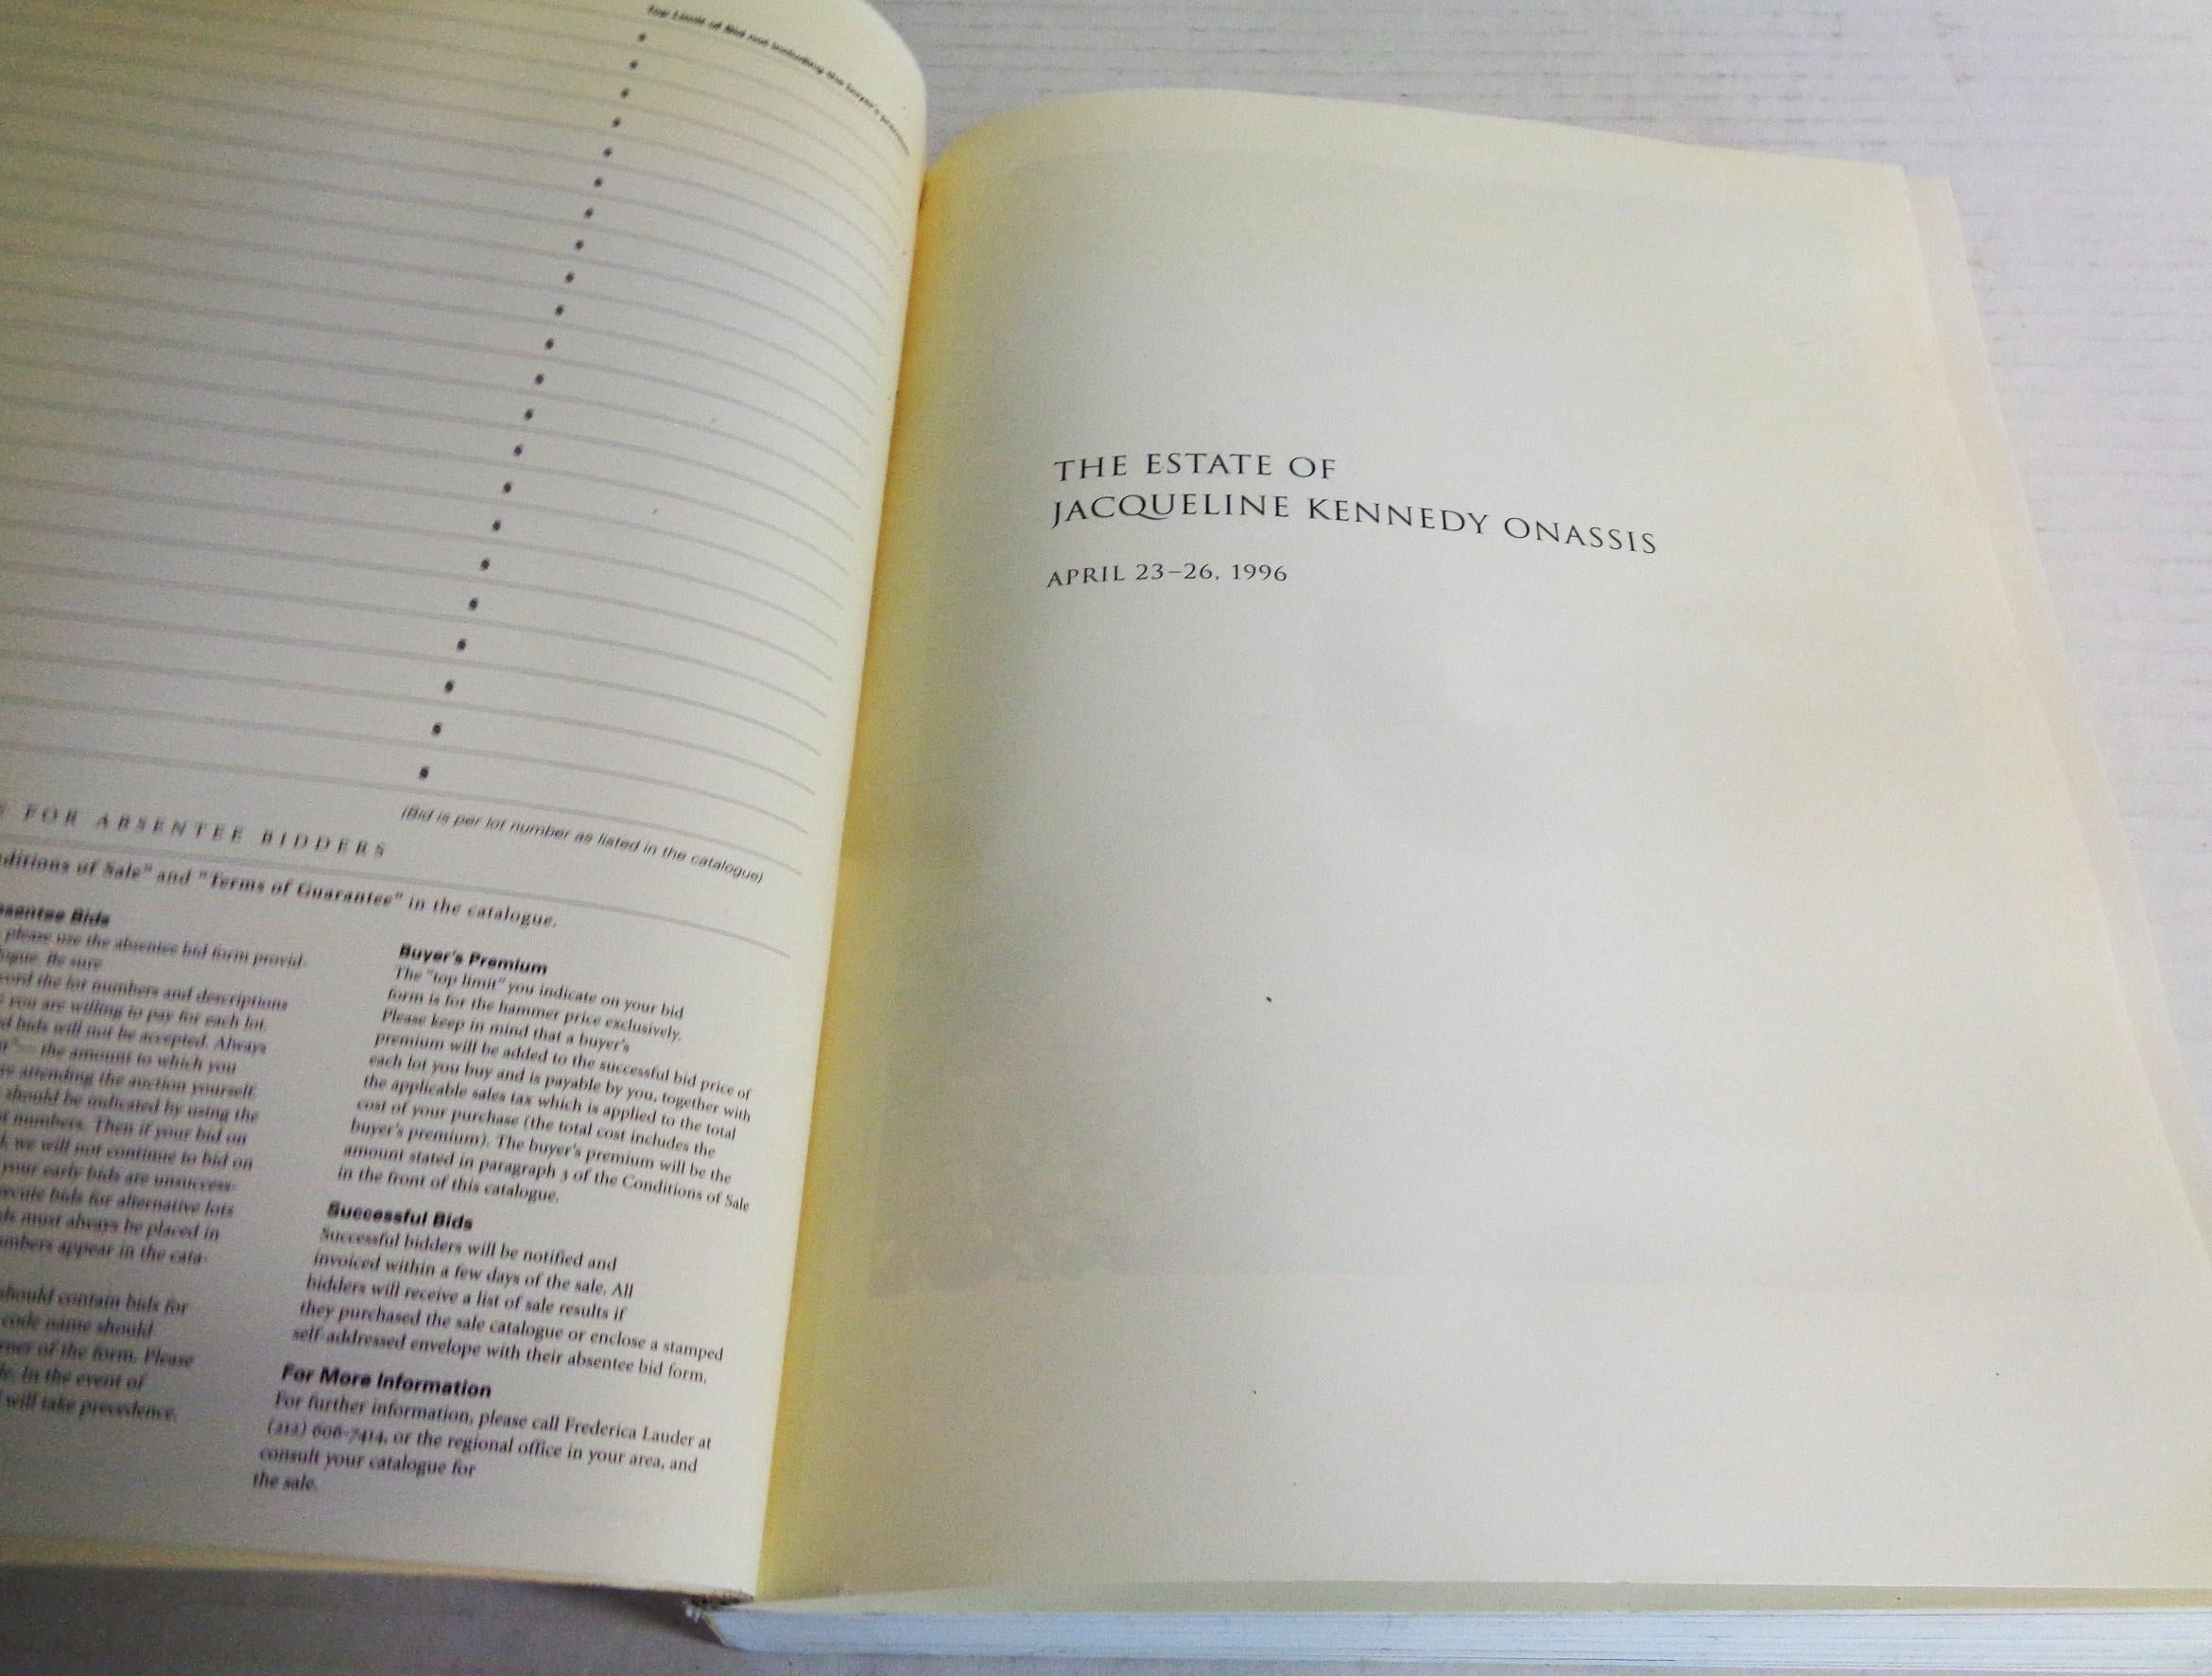 The Estate Of Jacqueline Kennedy Onassis: April 23-26. 1996 - Sotheby's, New York - Auction Catalog. 1st edition. Ivory colored softcover book w/ silver lettering. 584 pages / nine sessions w/ 1195 illustrated lots in b/w and full color. 
absentee